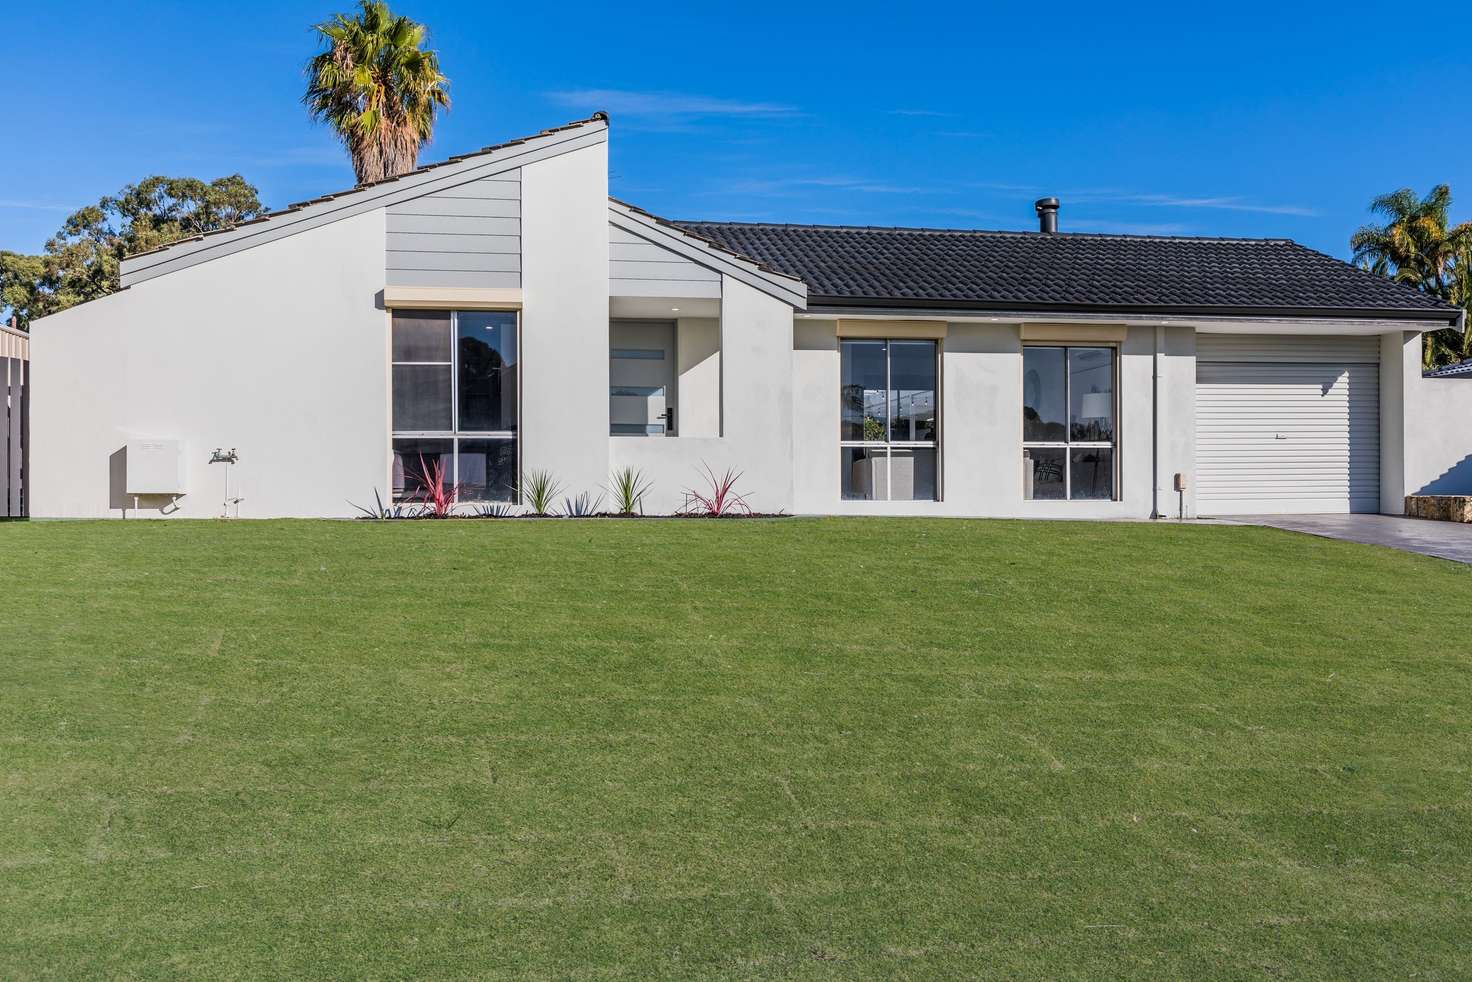 Main view of Homely house listing, 32 MERIDIAN DRIVE, Mullaloo WA 6027